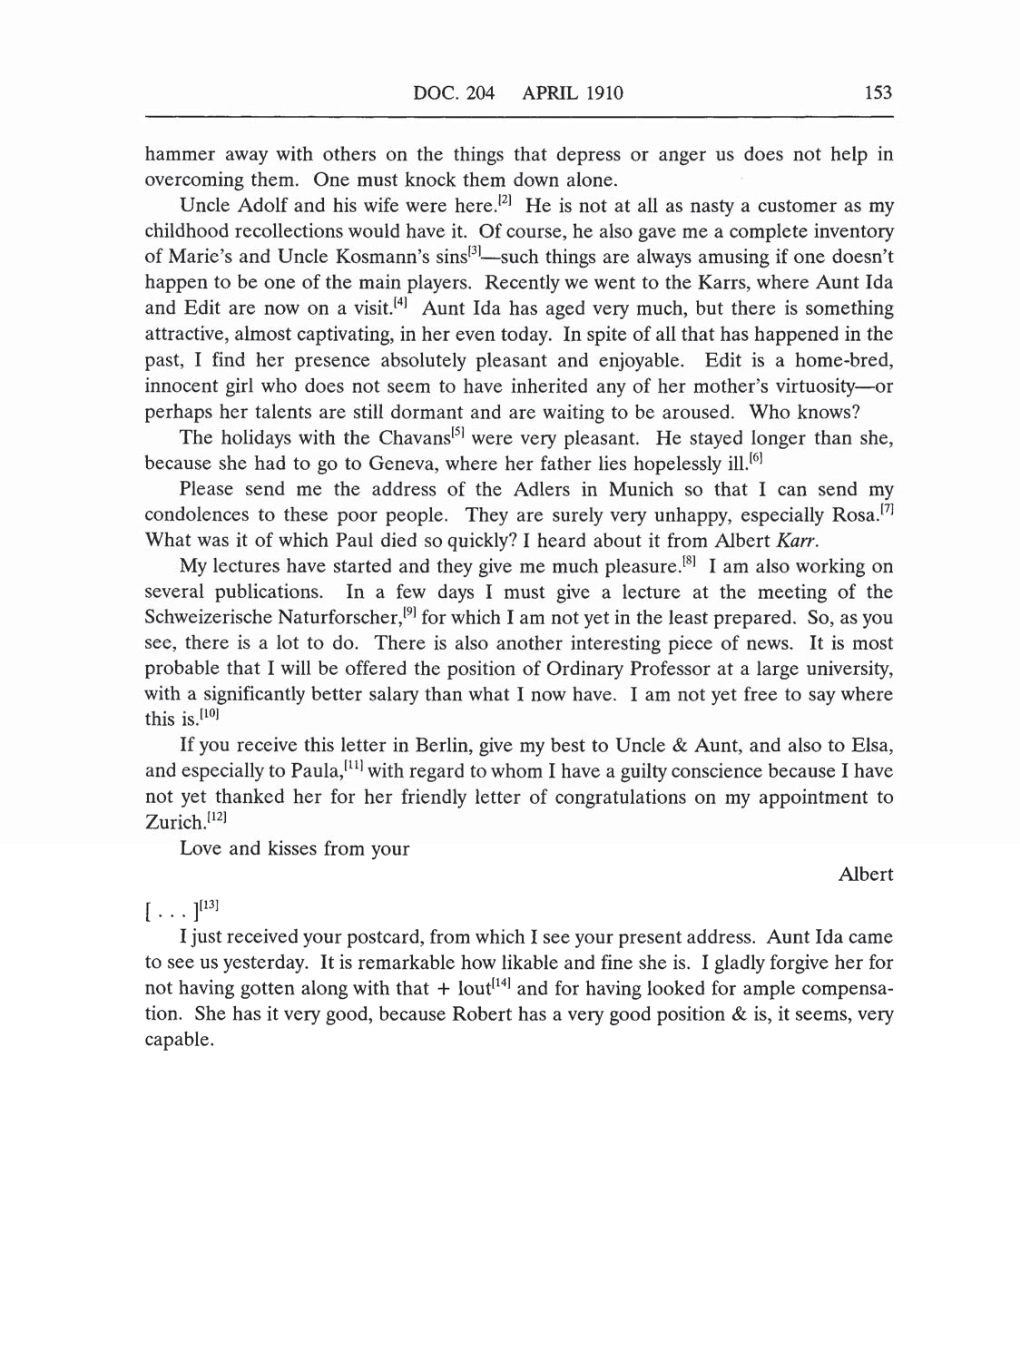 Volume 5: The Swiss Years: Correspondence, 1902-1914 (English translation supplement) page 153